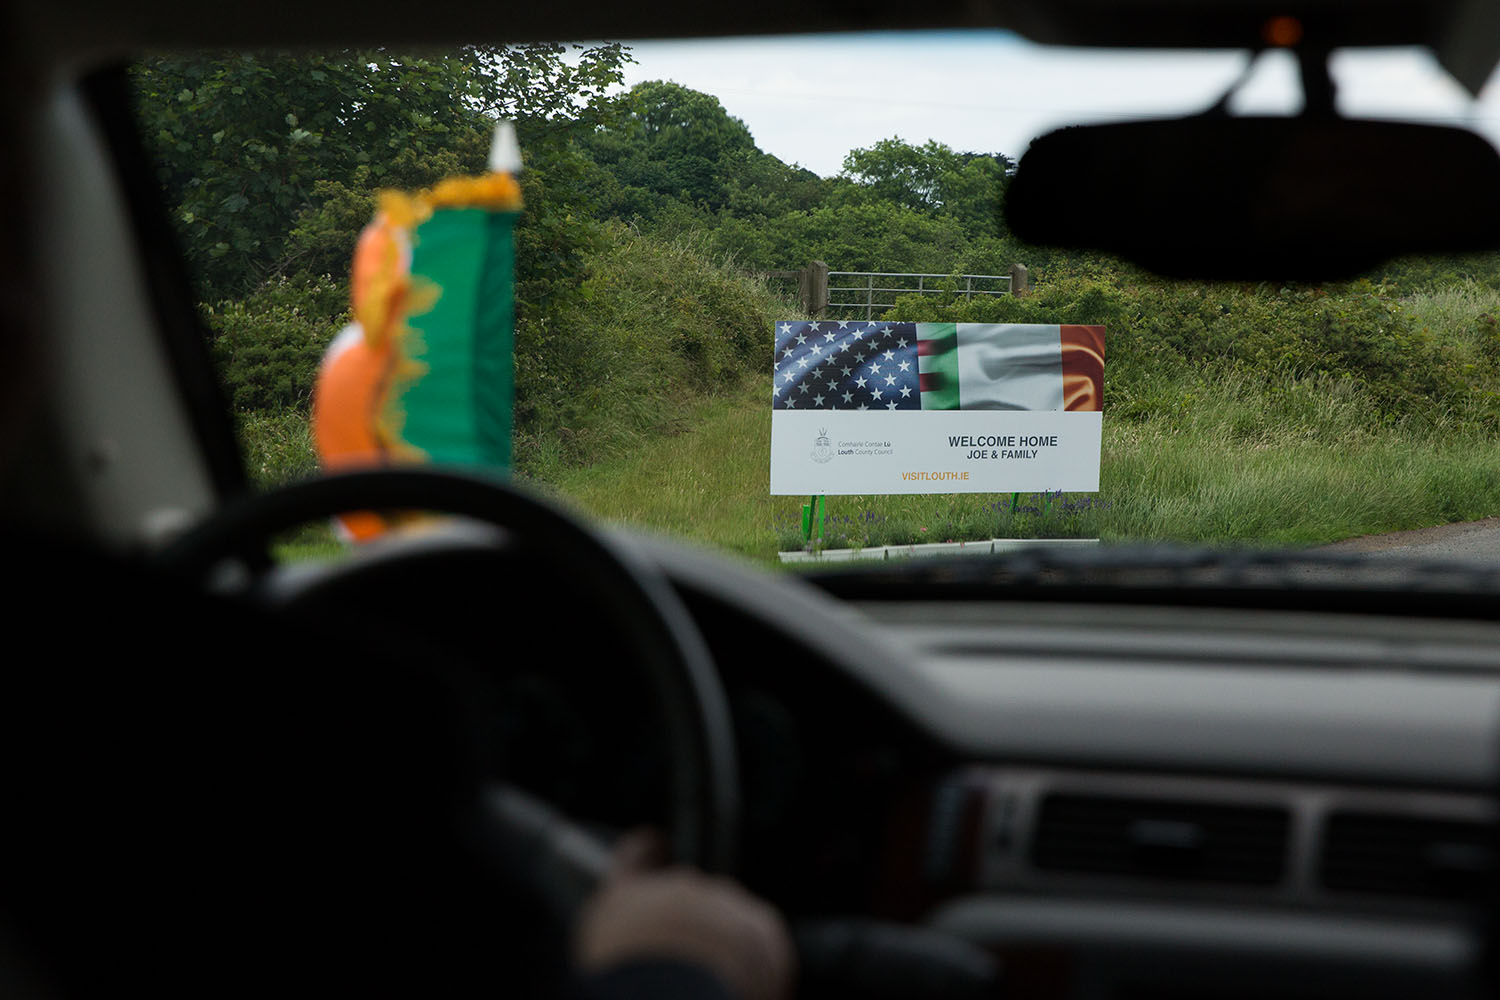 A sign along the side of the road welcomes Vice President Joe Biden and his family to County Louth, Ireland, June 25, 2016. (Official White House Photo by David Lienemann)